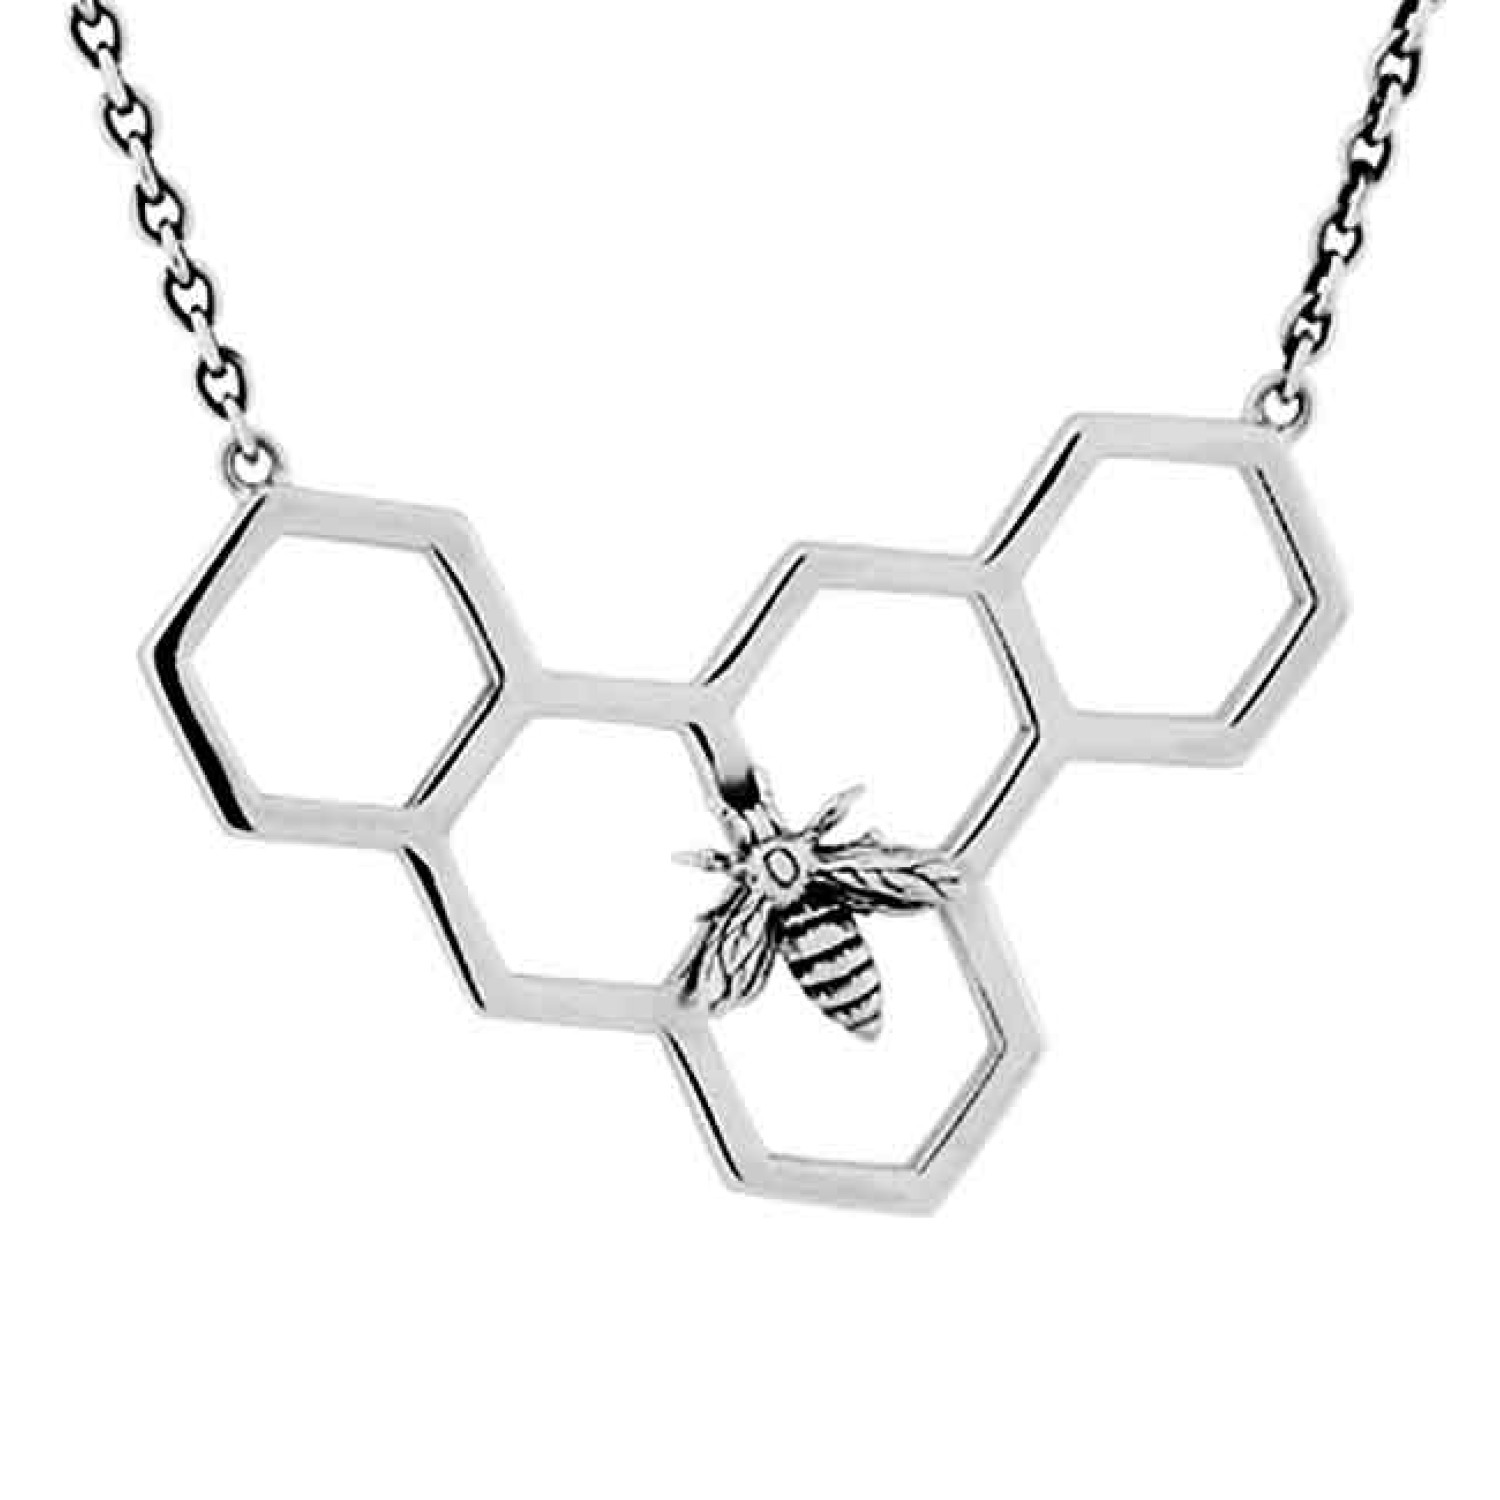 2N61000 Evolve NZ Honeycomb Necklace. The New Zealand manuka honeycomb is known for its unique and special healing properties. This stunning necklace represents health and vitality, strengthening our personal resolve.  Available in store at Christies or @